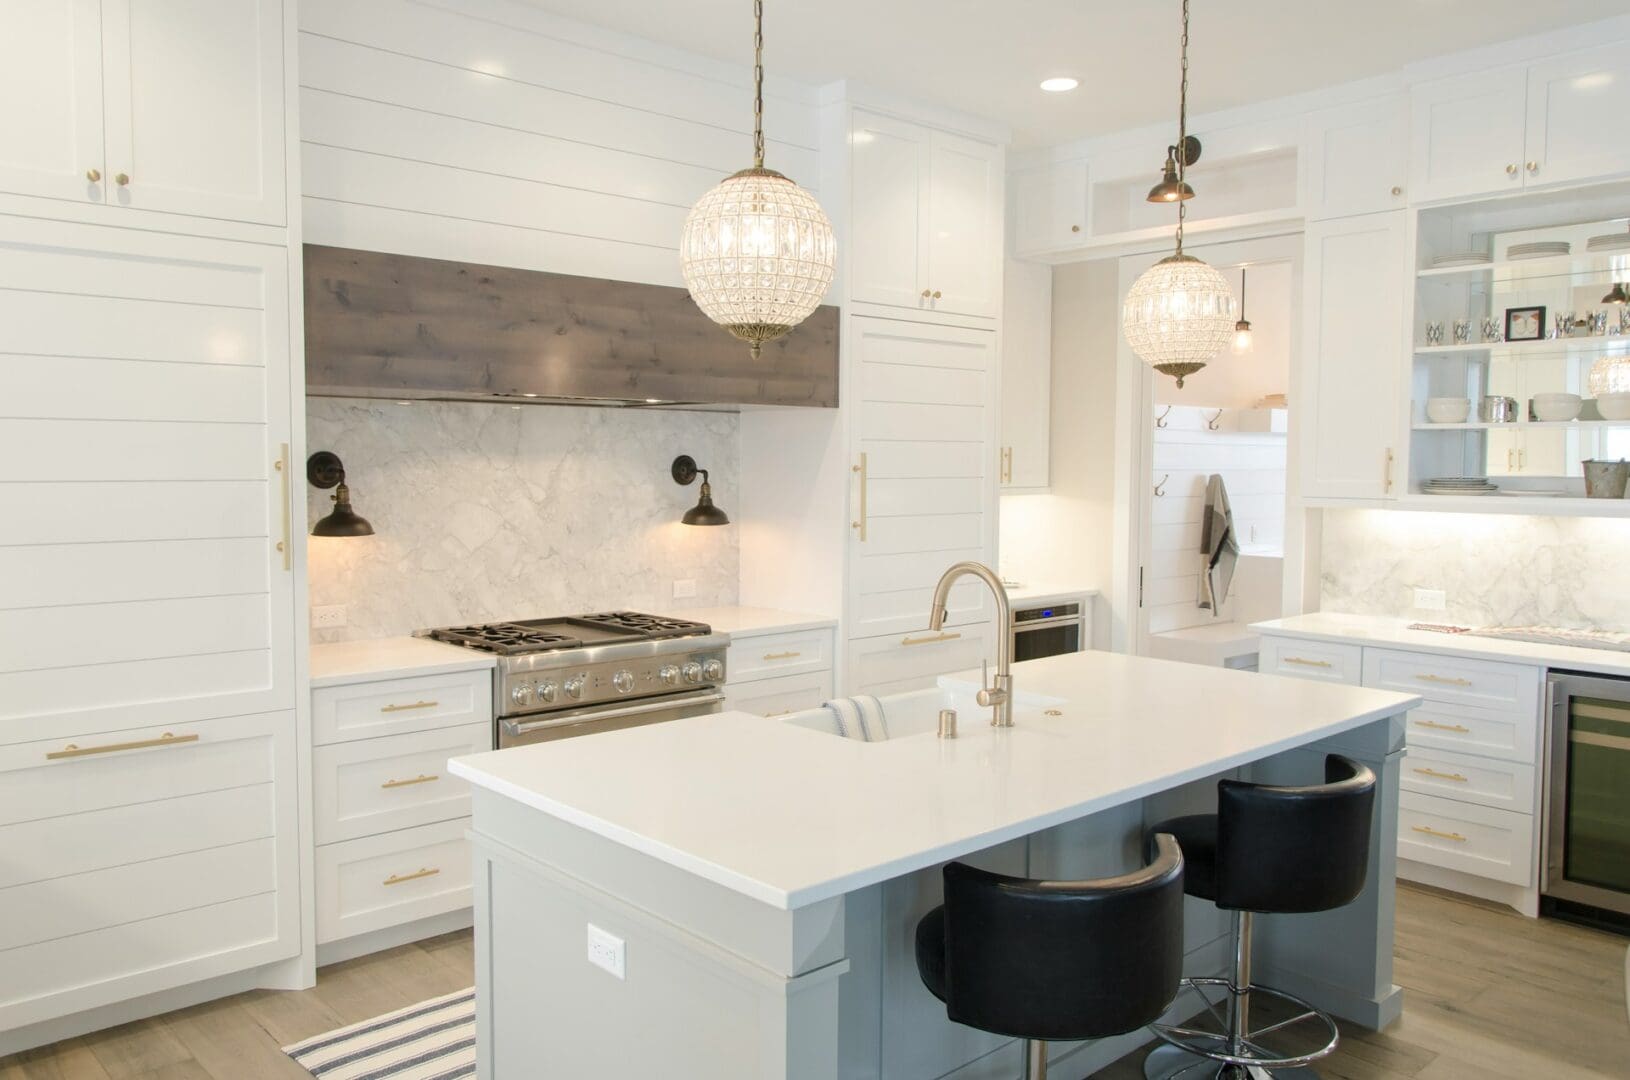 Modern kitchen with white cabinets, marble backsplash, central island with bar stools, and pendant lighting, perfect for real estate sellers.